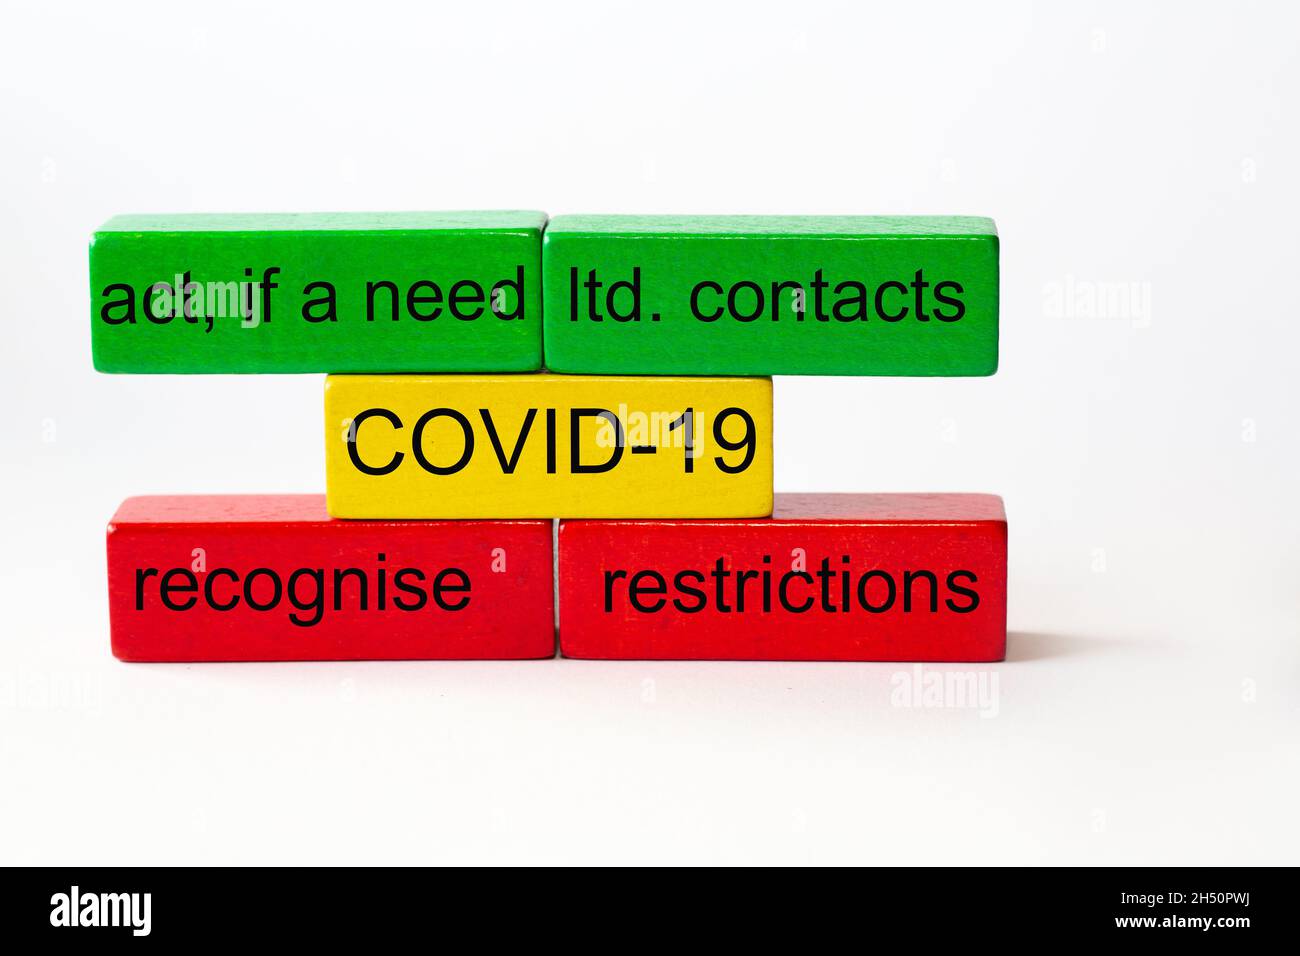 colored toy blocks with the words ltd. contacts, restrictions, recognise, act, if a need and the word COVID-19 in the middle Stock Photo